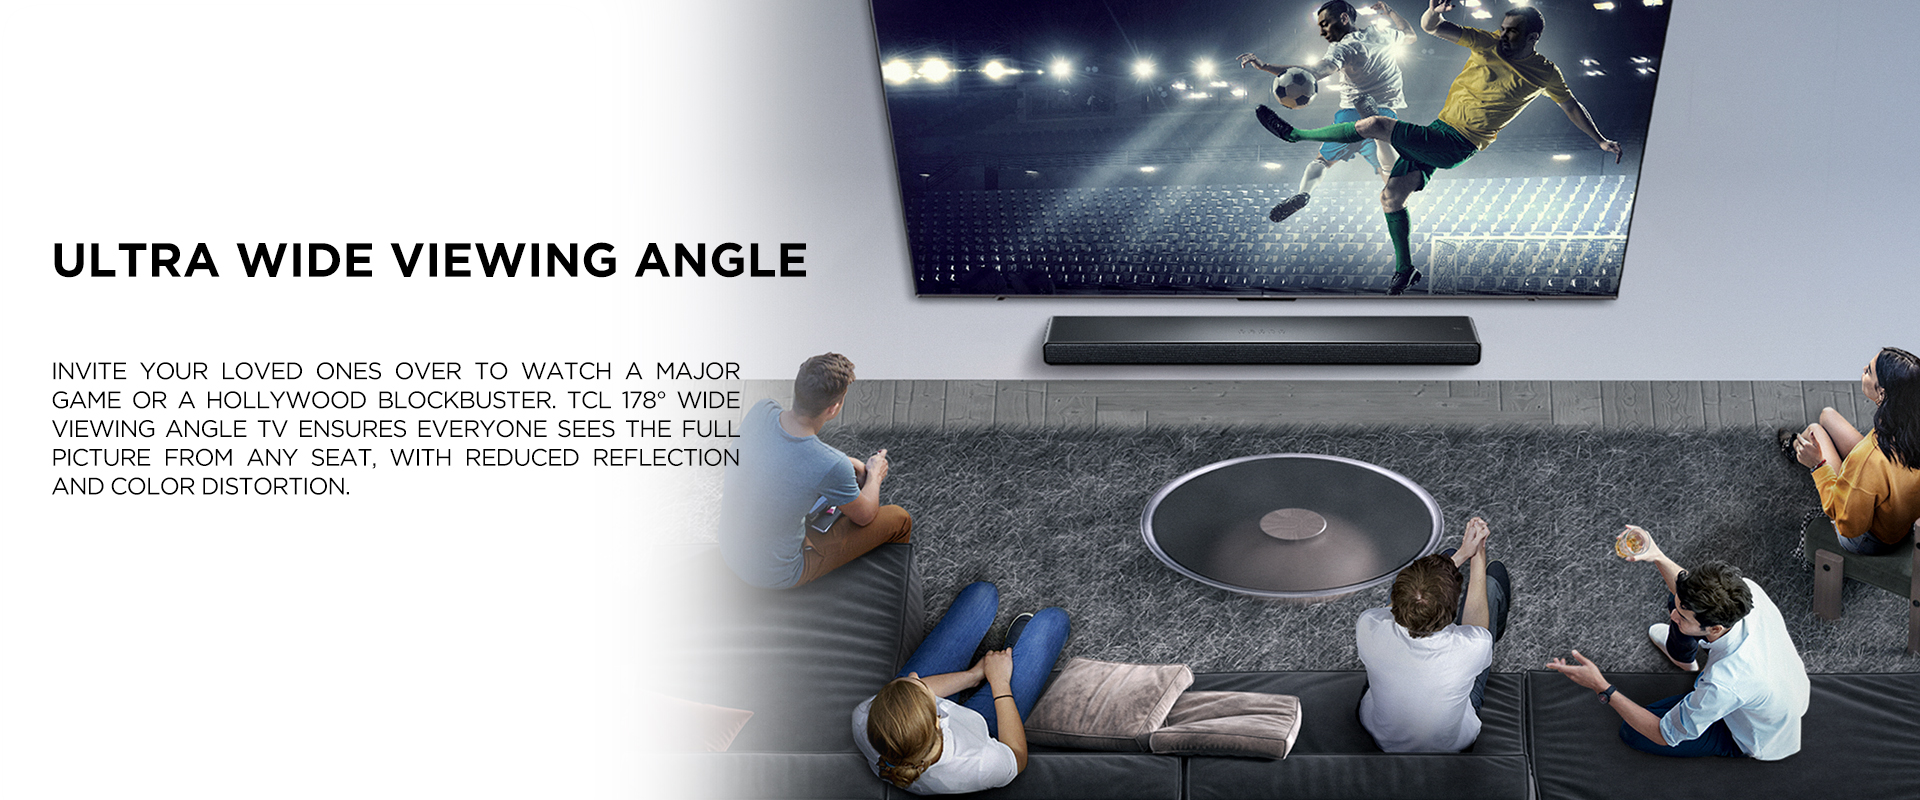 Ultra Wide Viewing Angle - Invite your loved ones over to watch a major game or a Hollywood blockbuster. TCL 178?ø Wide Viewing Angle TV ensures everyone sees the full picture from any seat, with reduced reflection and color distortion.